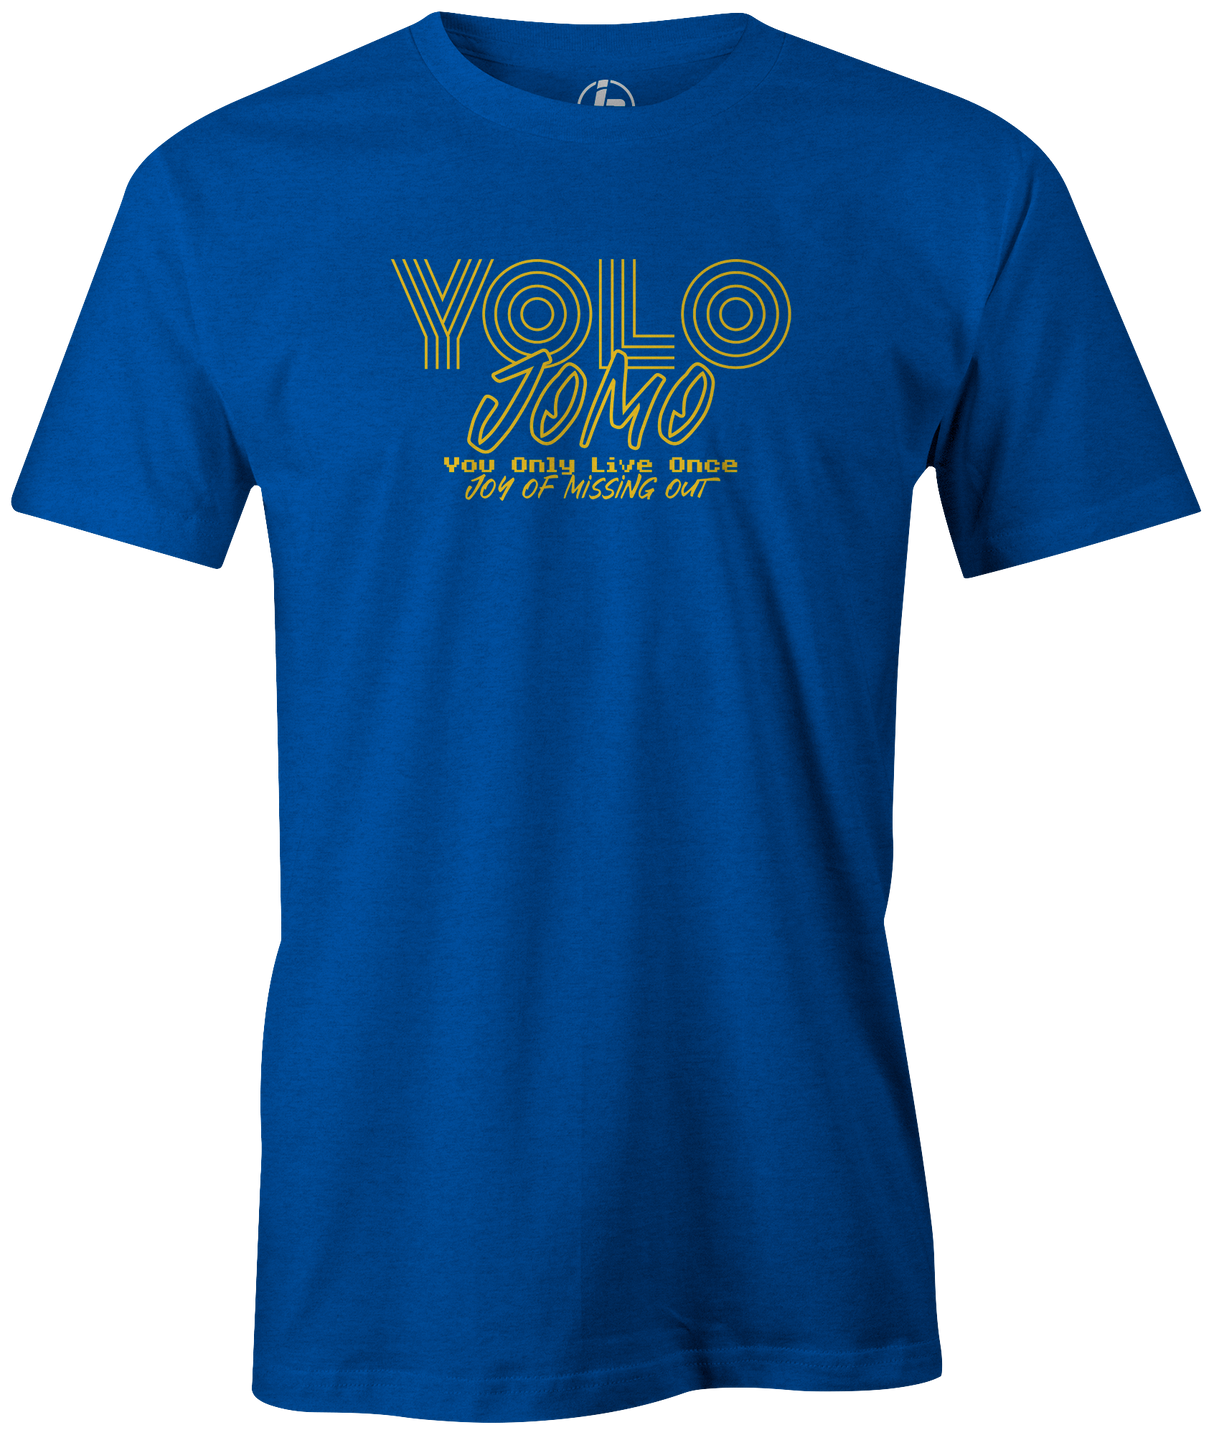 It's time to put some Swag in your bag with the new Swag Yolo Jomo! This shirt is perfect for bowling practice, leagues or weekend tournaments. Men's T-Shirt, bowling ball, tee, tee shirt, tee-shirt, t shirt, t-shirt, tees, league, tournament shirt, PBA, PWBA, USBC. Charcoal, Black, Purple, Red